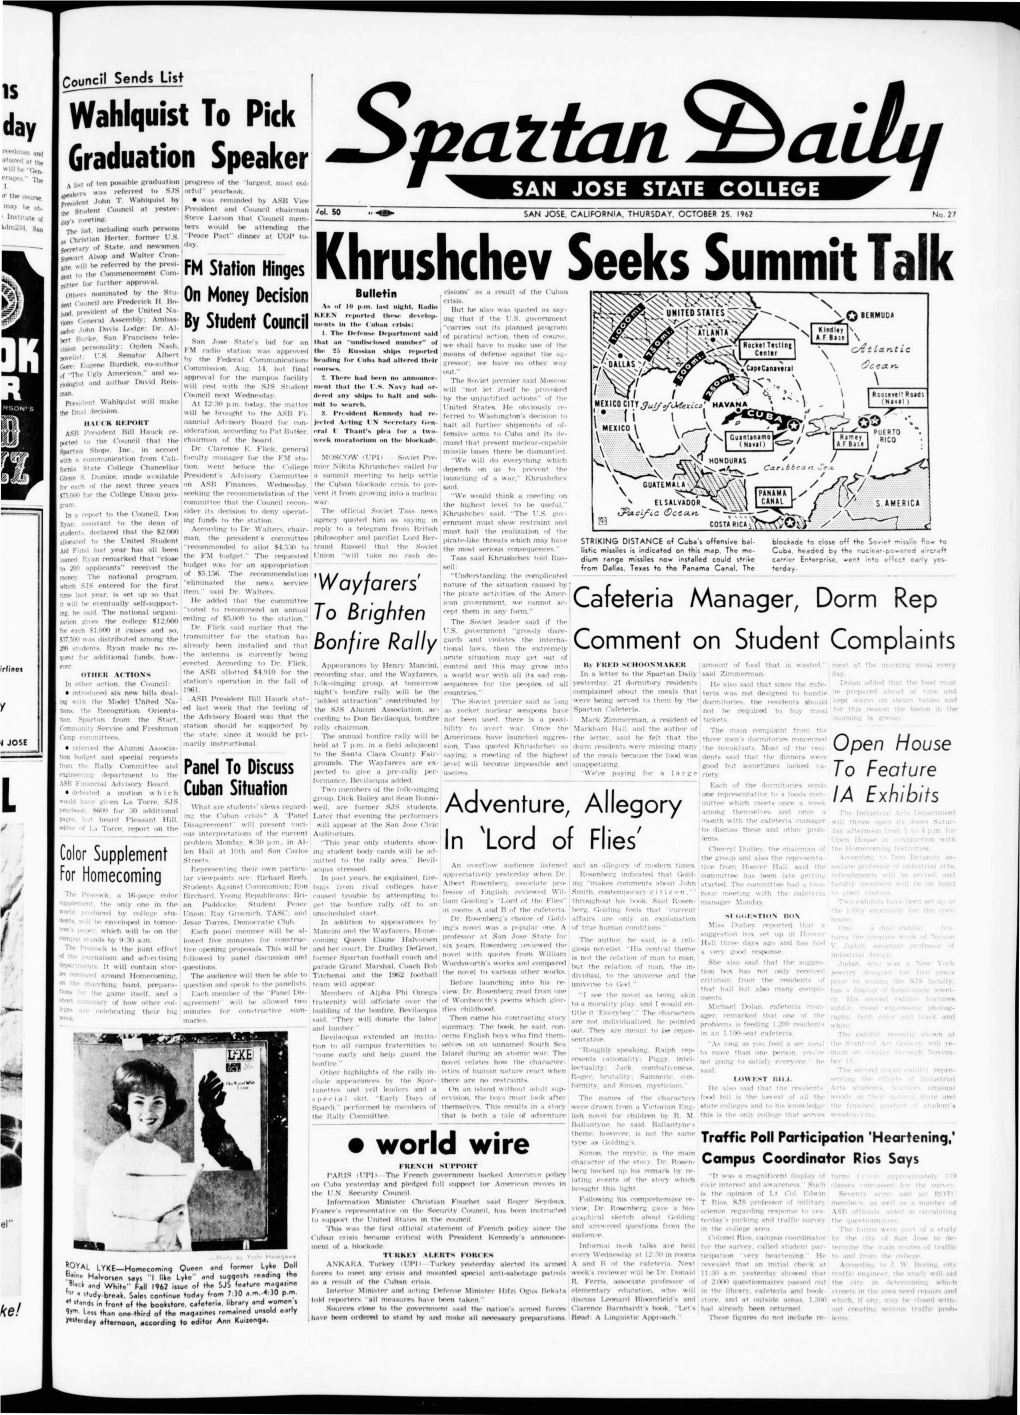 Hrushchev Seeks Summit Talk Others Nominated by the S